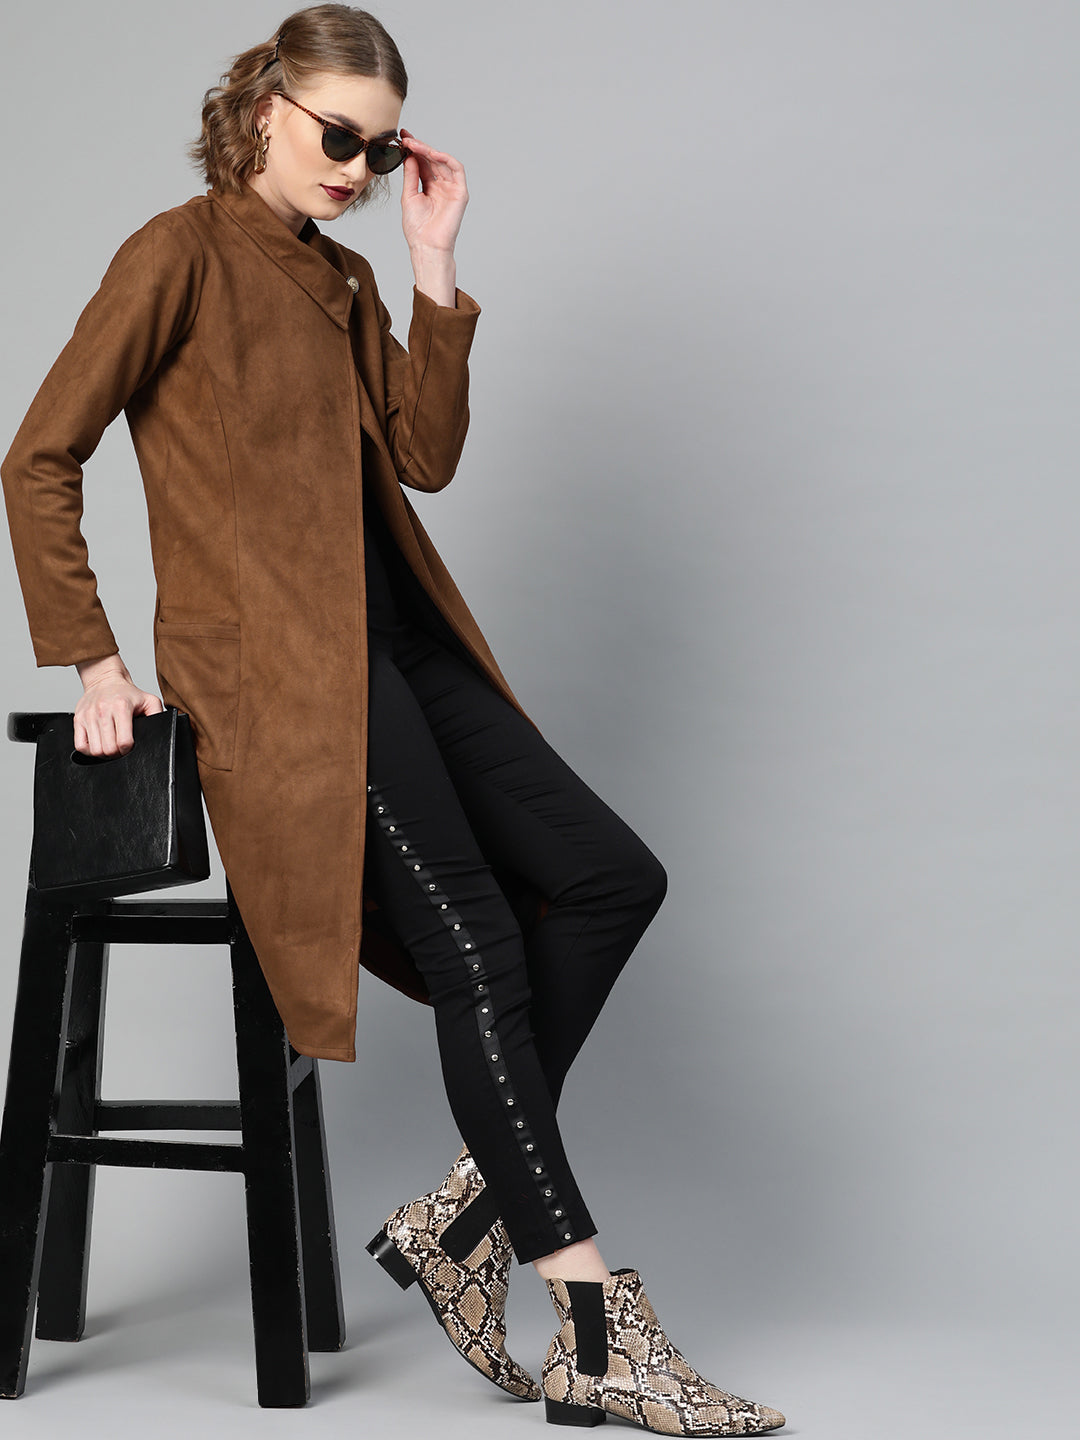 Athena Women Brown Suede Finish Solid Overcoat - Athena Lifestyle